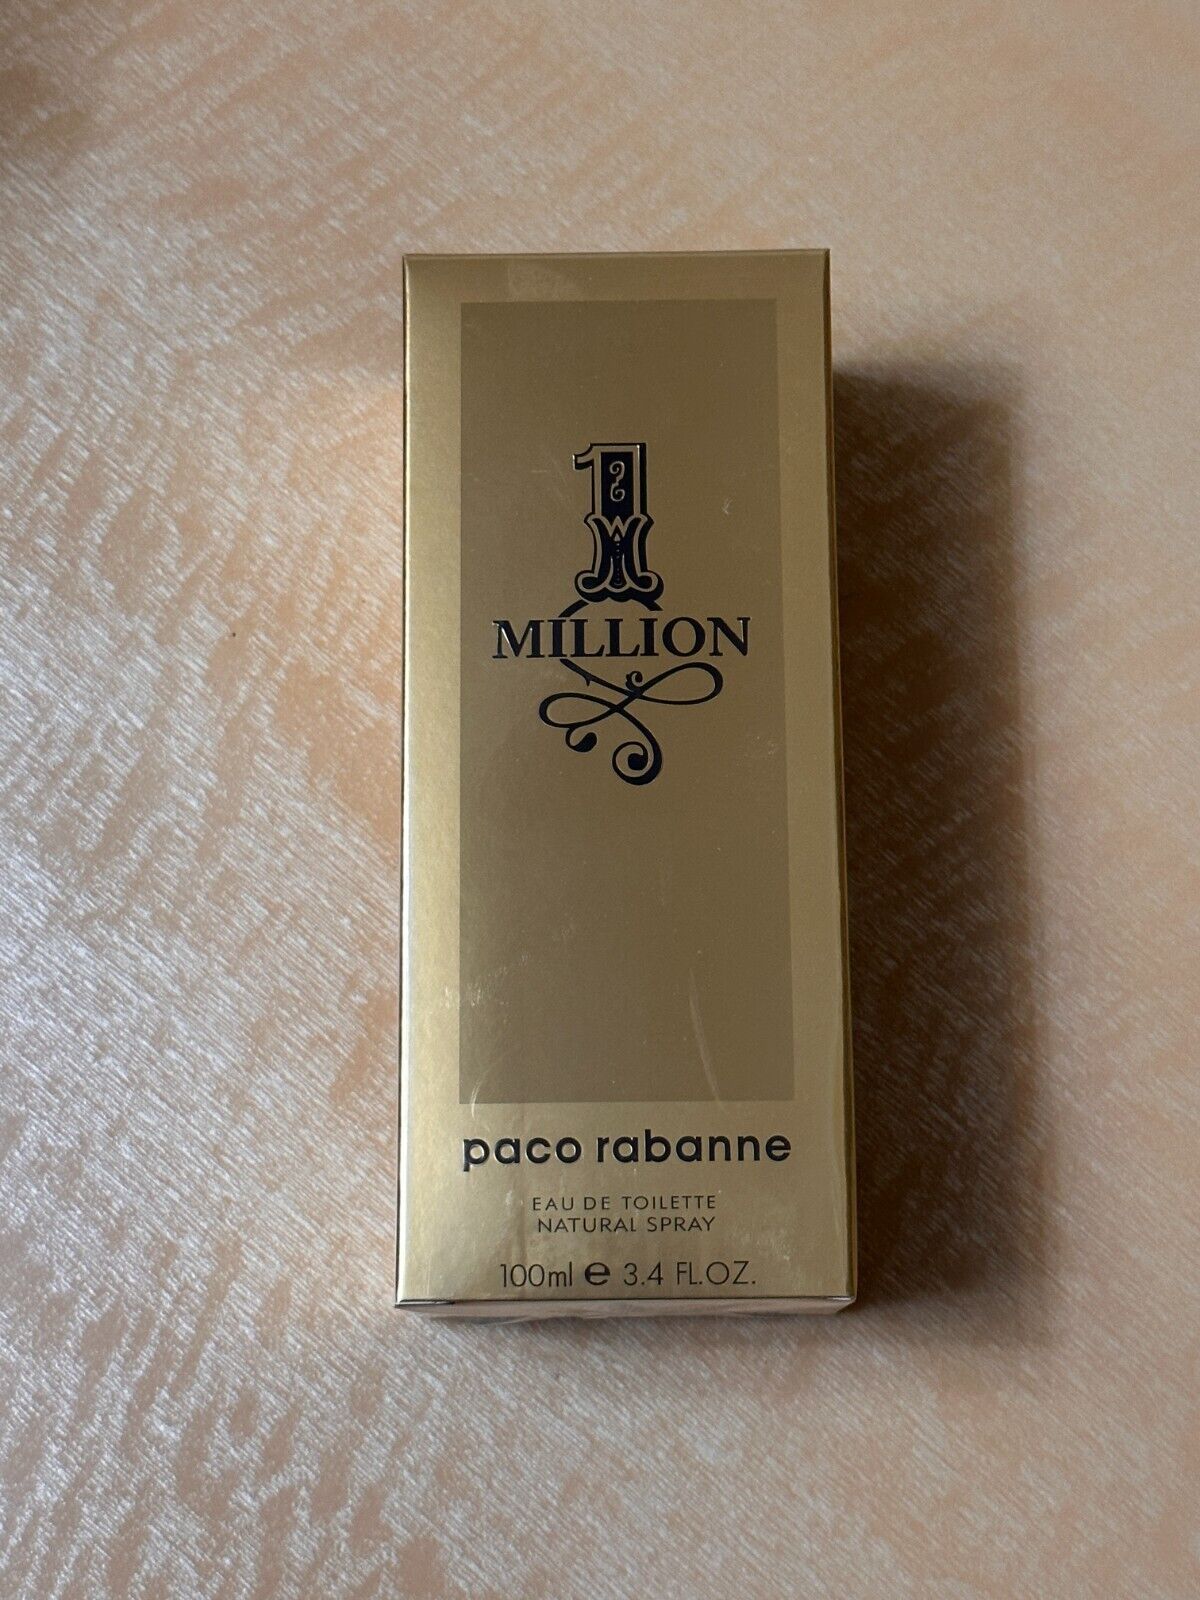 1 One Million by Paco Rabanne 3.4 fl oz/100 mL EDT Cologne for Men New In Box